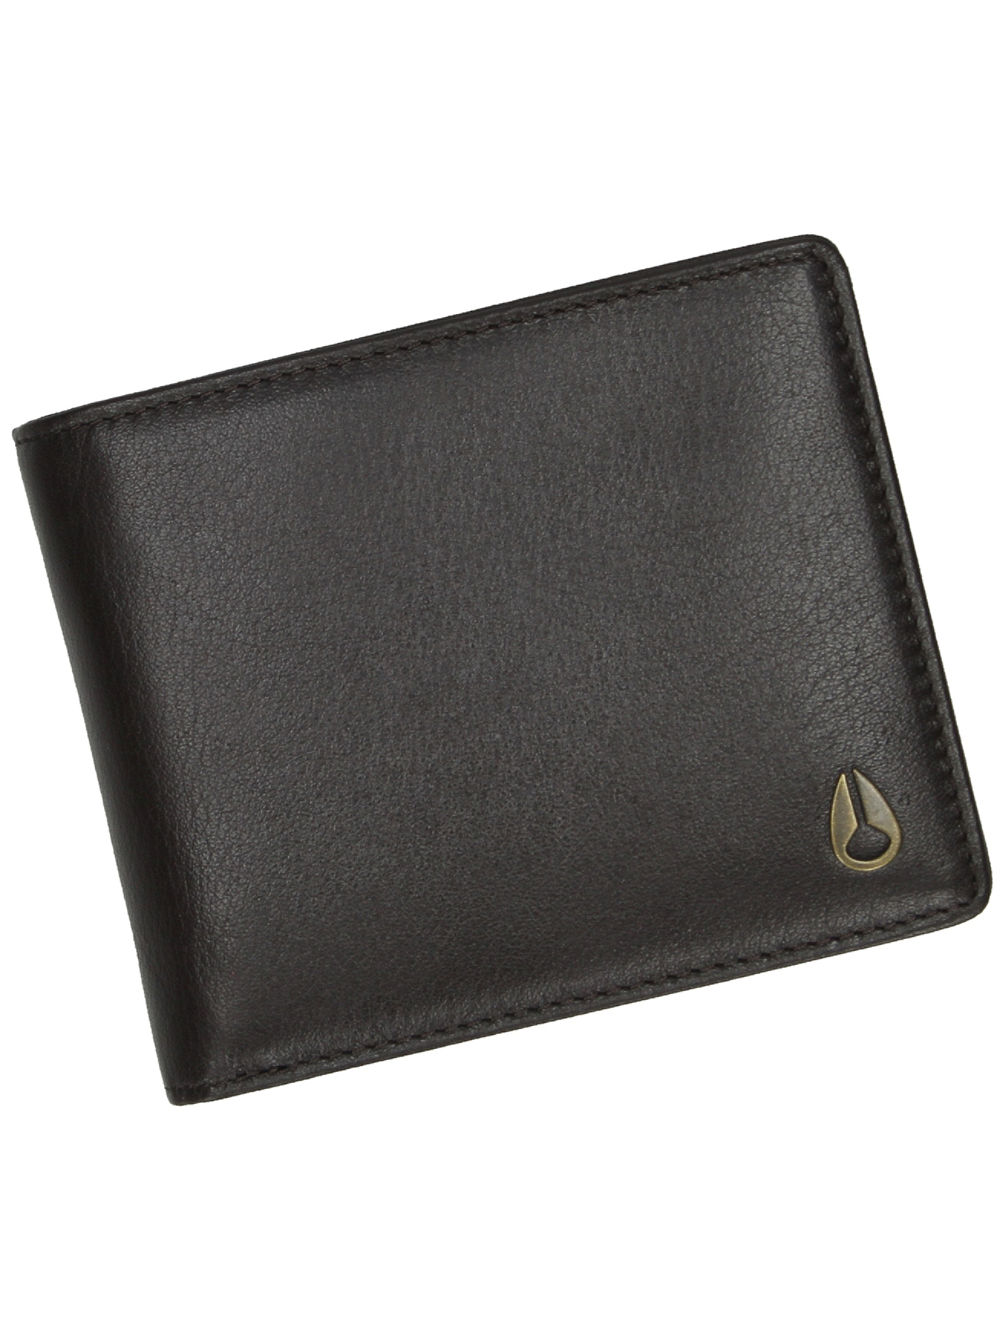 Pass Leather Coin Cartera